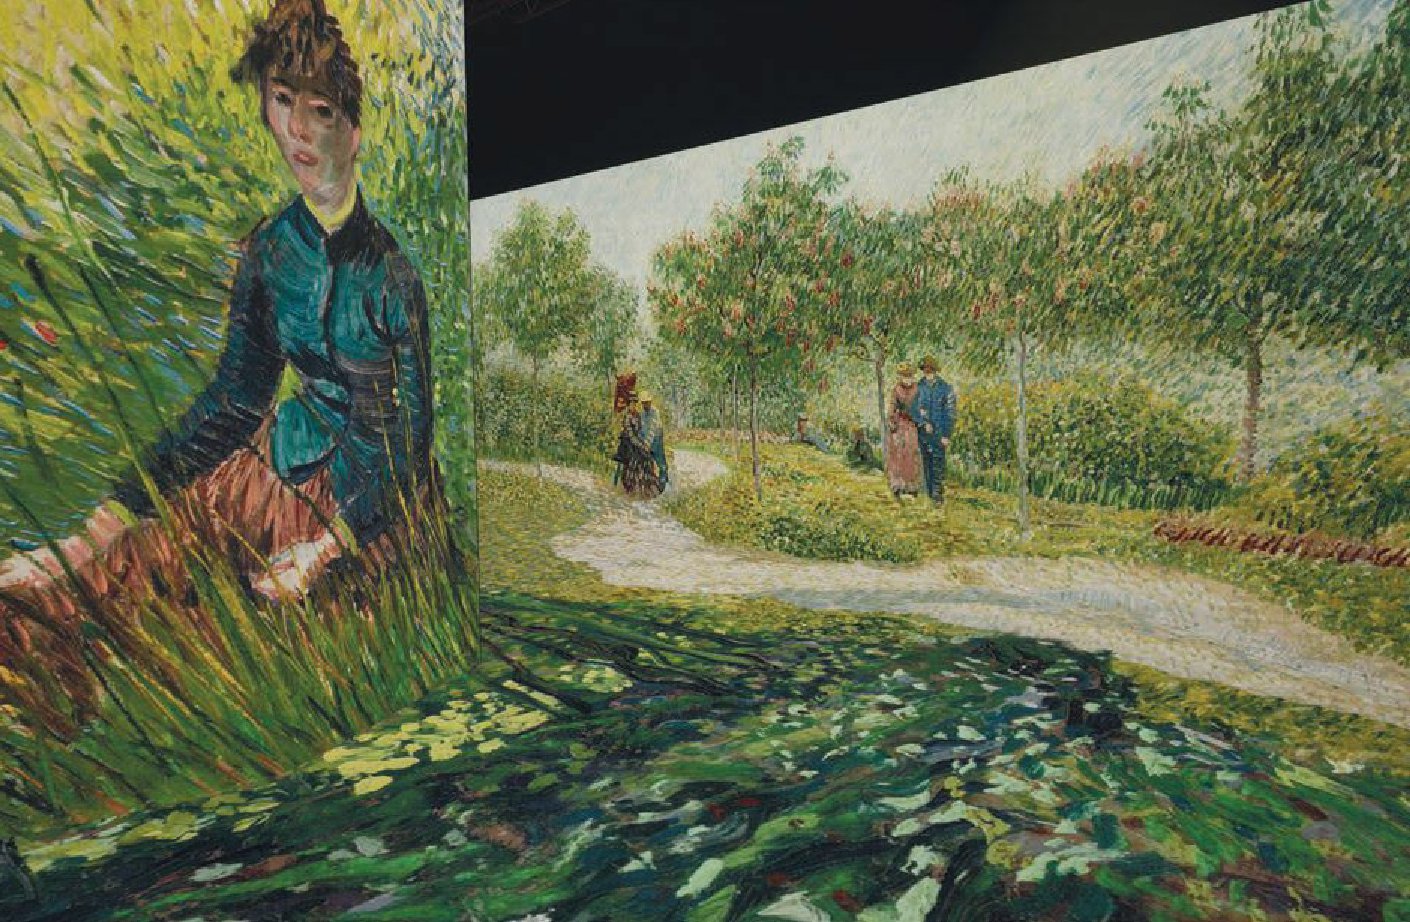 Interactive treatments of “Woman Sitting in the Grass” and “Garden with Courting Couples: Square Saint- Pierre” and “The Starry Night” by Vincent Van Gogh. PHOTO COURTESY OF VAN GOGH: AN IMMERSIVE EXPERIENCE